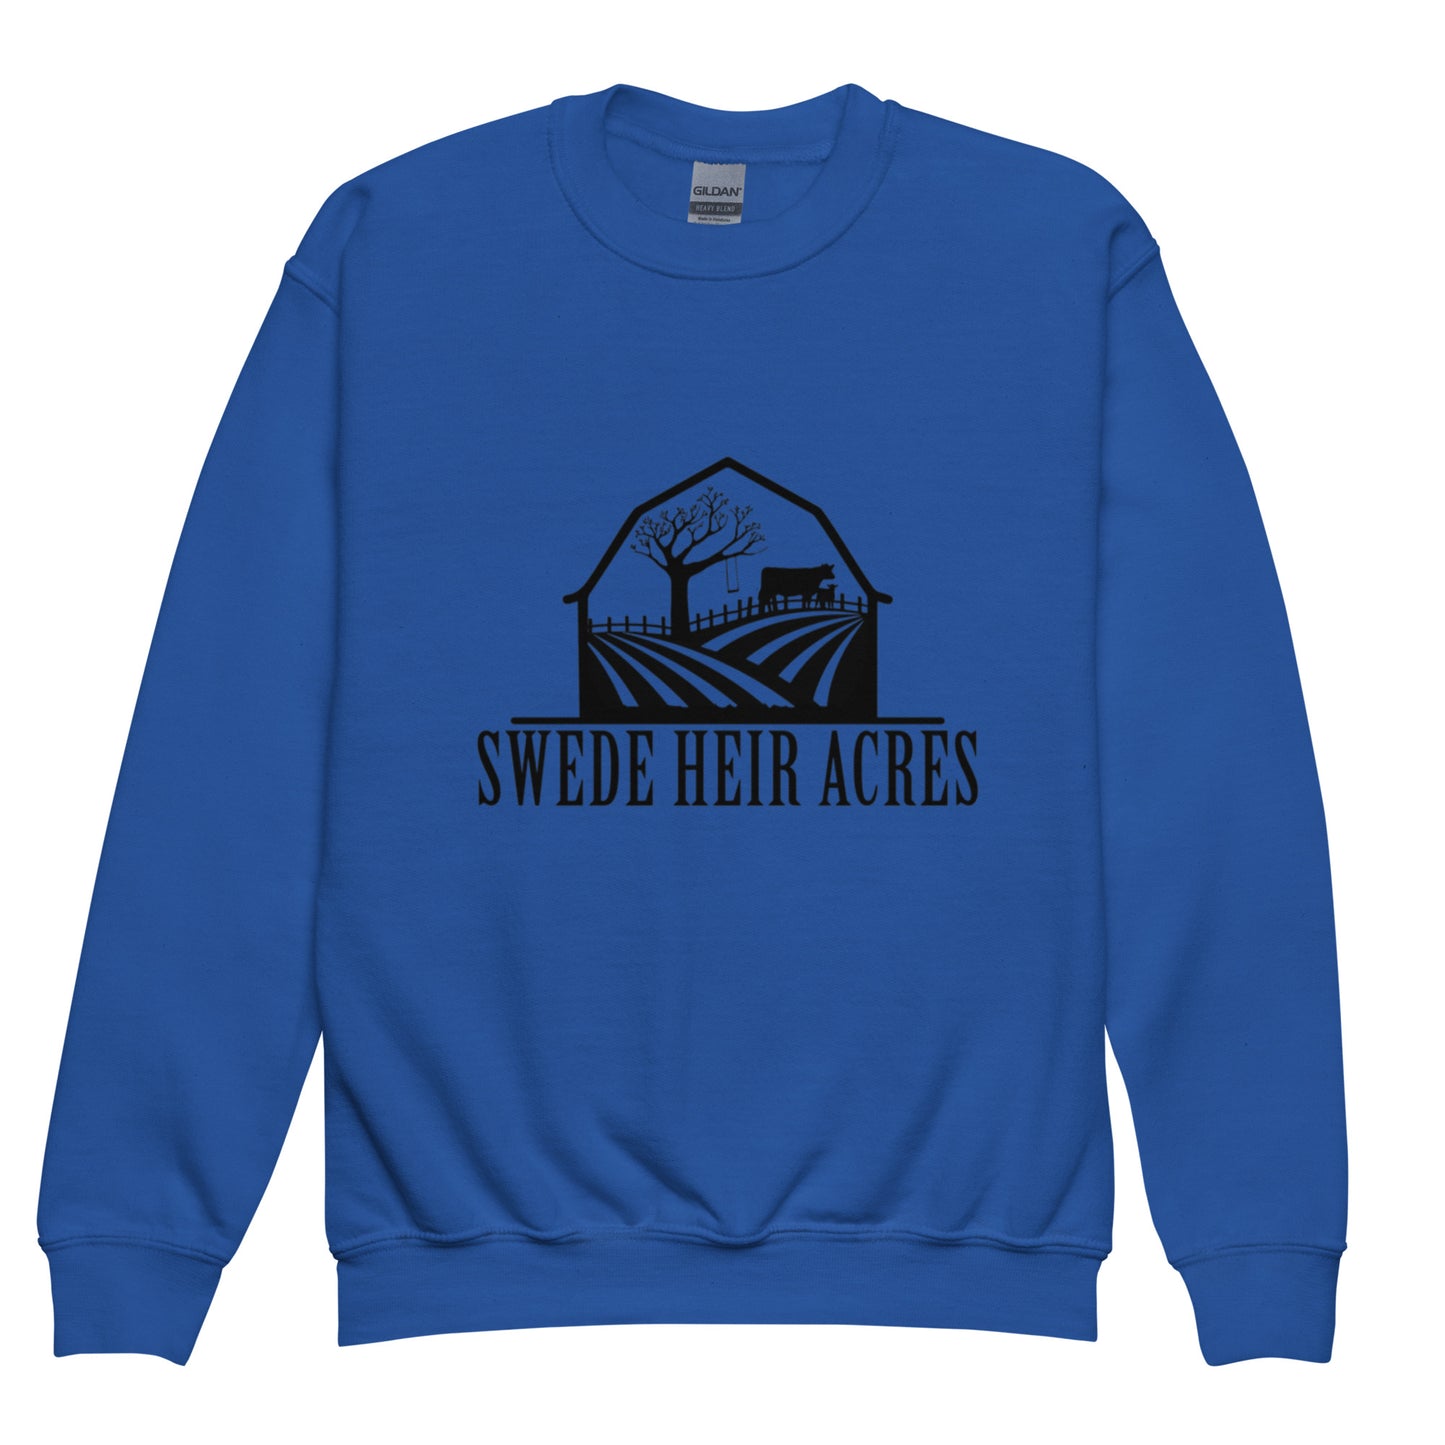 SWEDE HEIR ACRES - YOUTH CREW